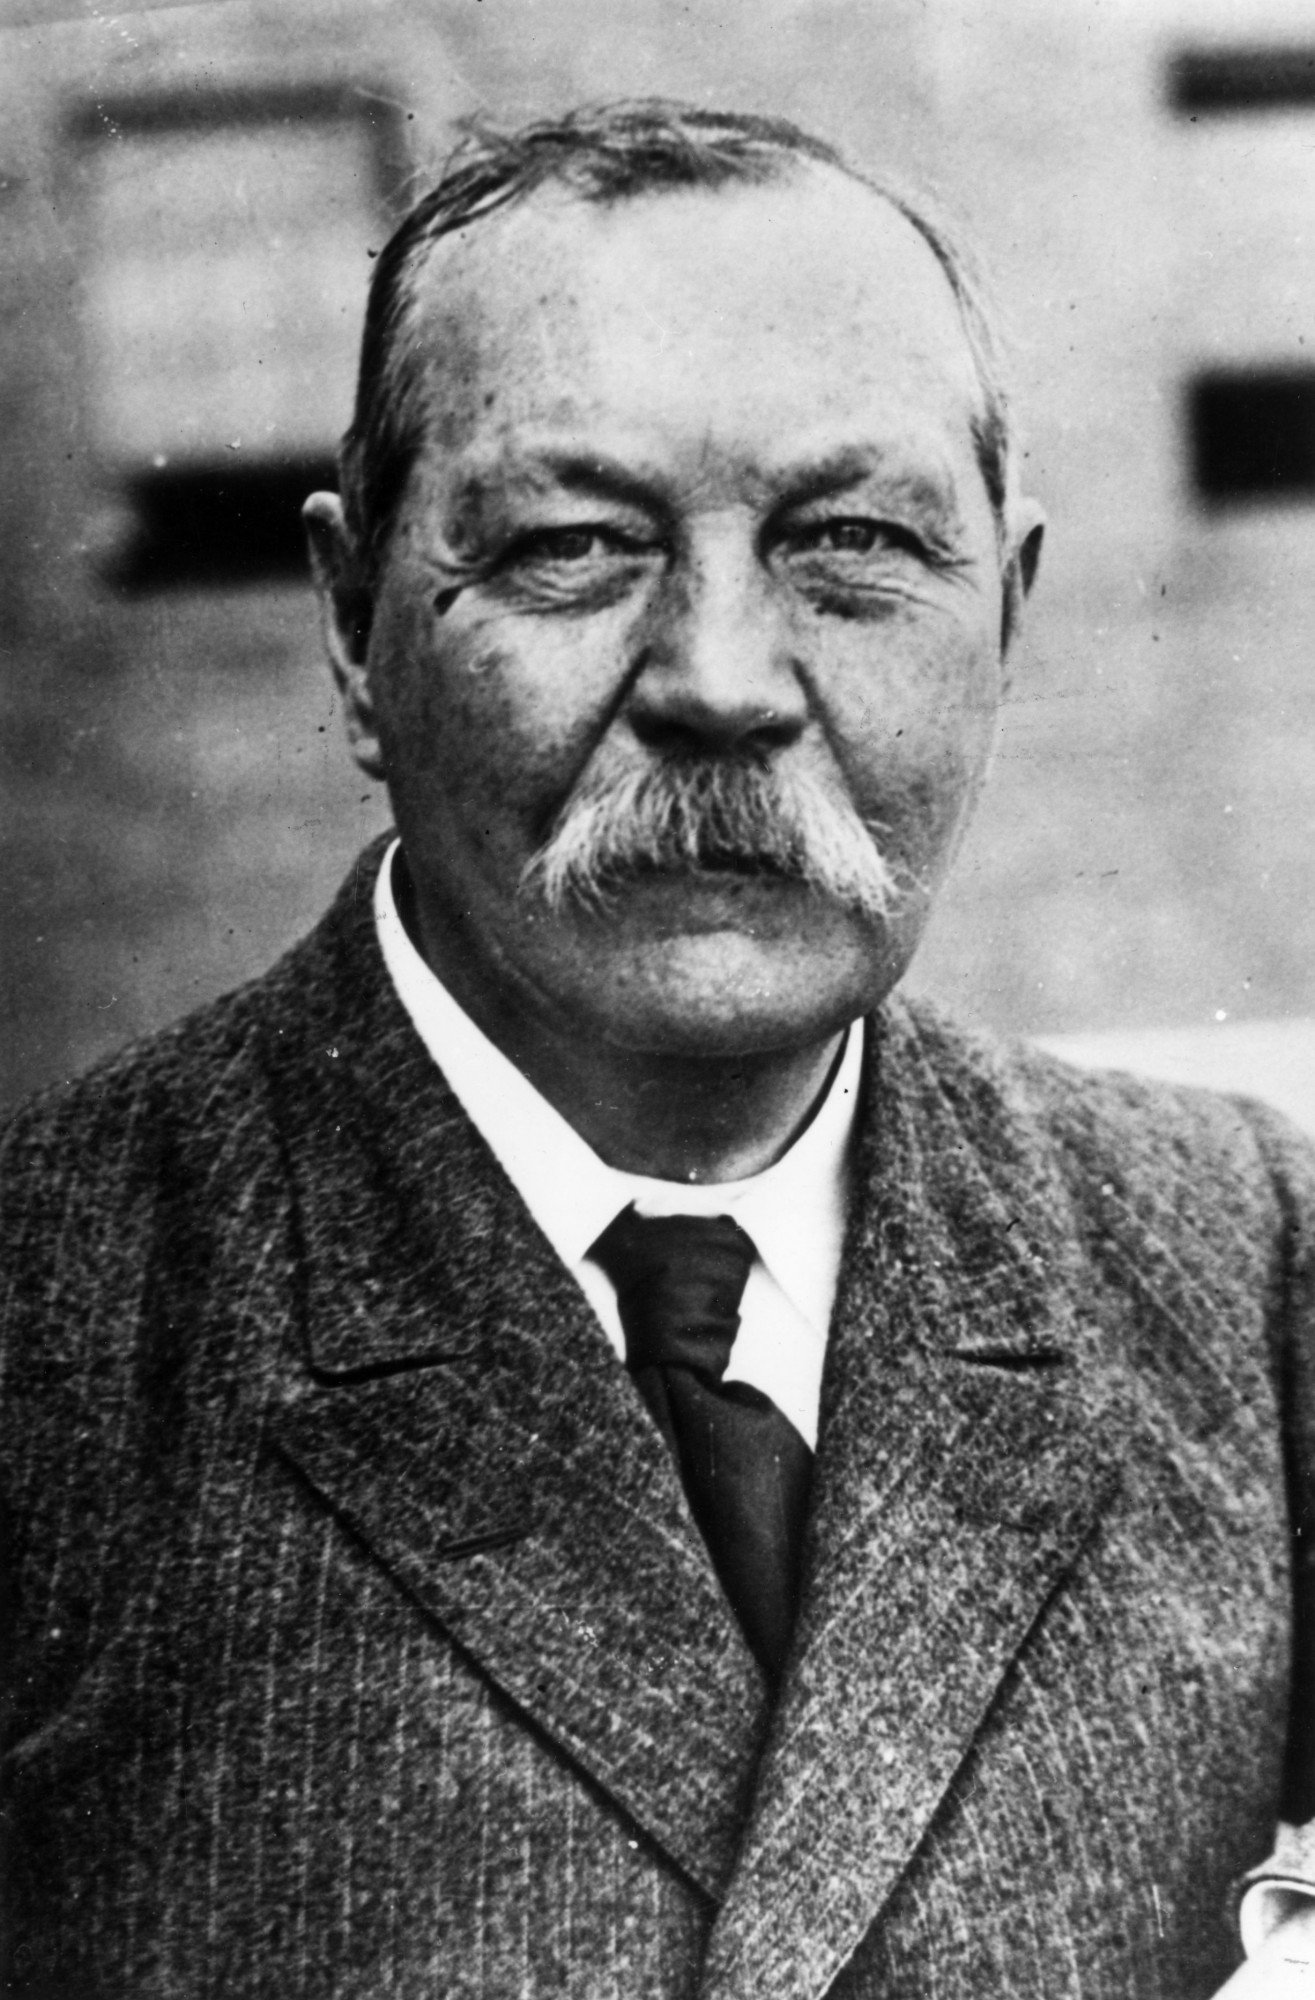 circa 1930: Scottish novelist Sir Arthur Conan Doyle. (Photo by General Photographic Agency/Getty Images)